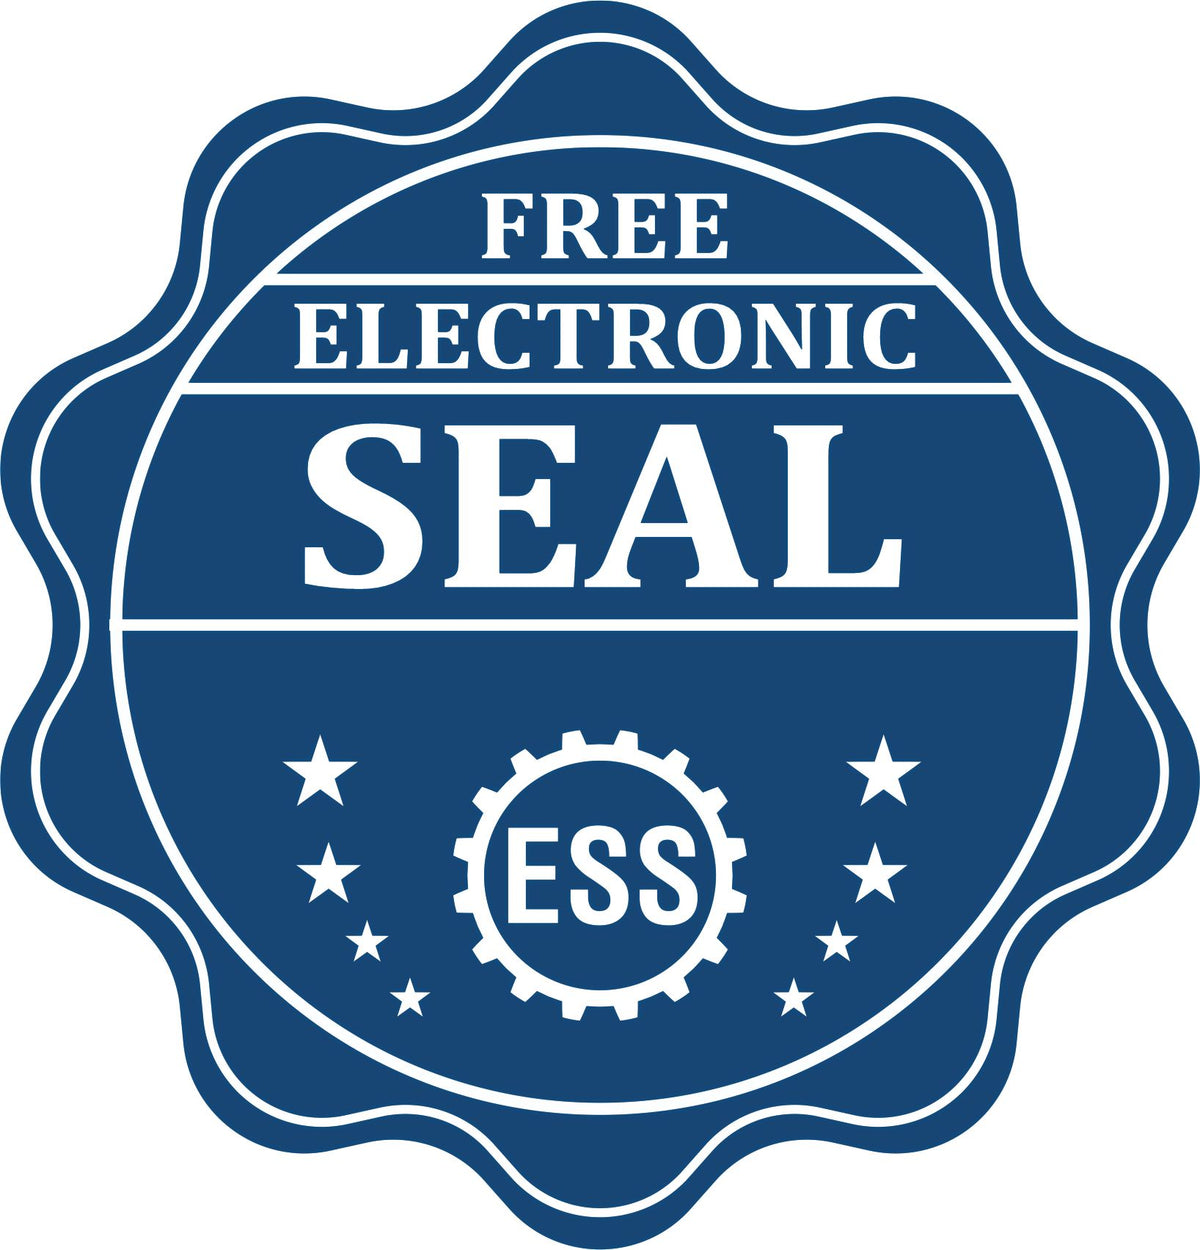 A badge showing a free electronic seal for the Handheld Mississippi Architect Seal Embosser with stars and the ESS gear on the emblem.